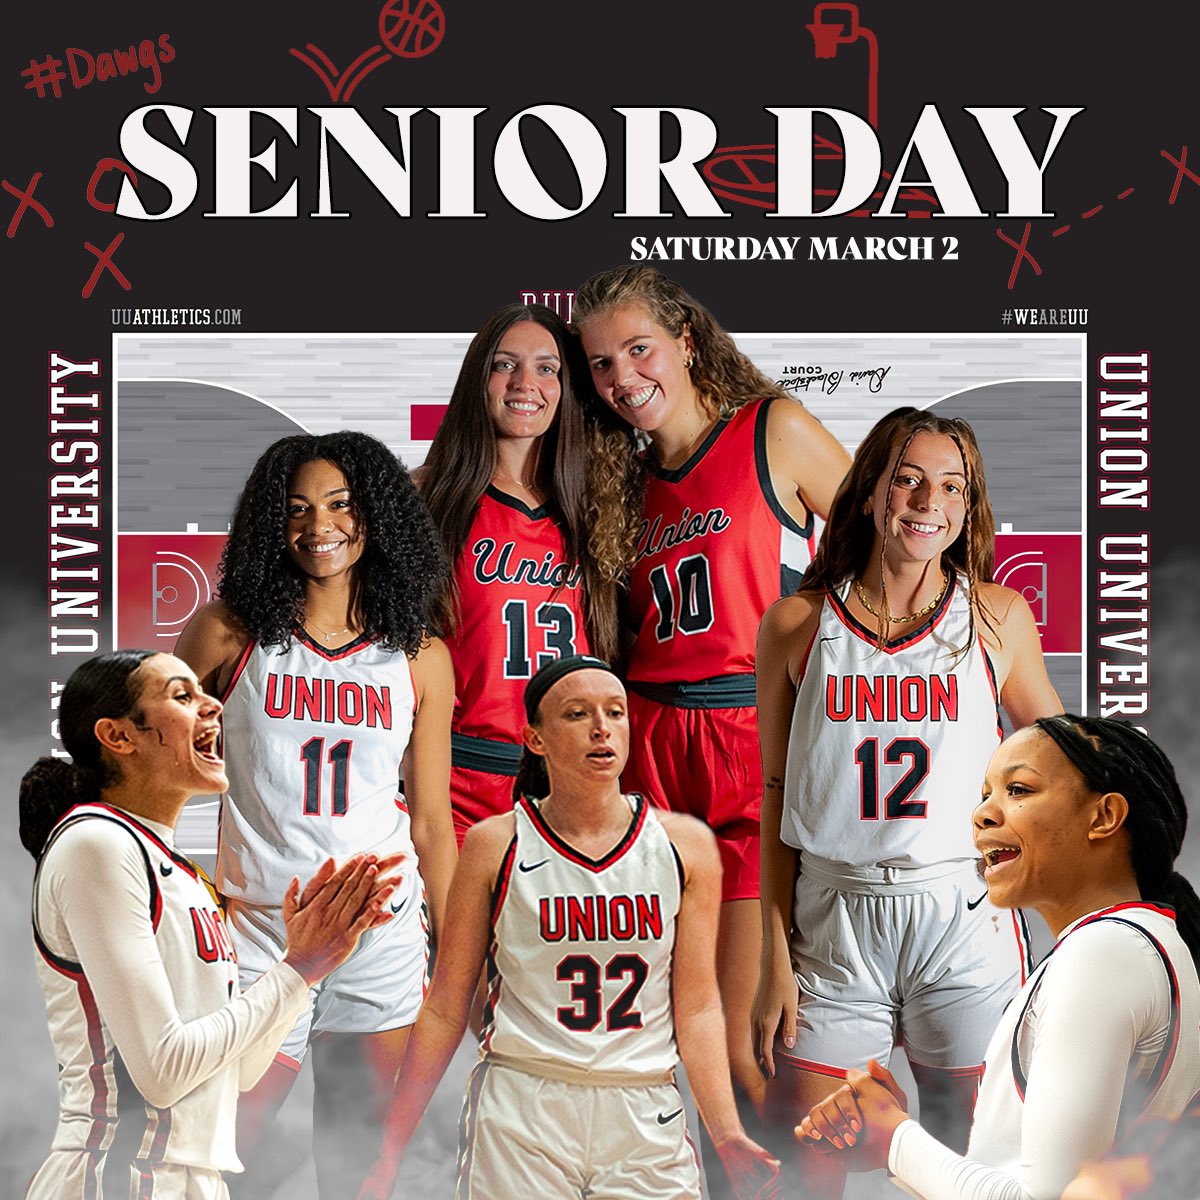 Come celebrate these seniors Saturday for their last regular season game in the Fred!